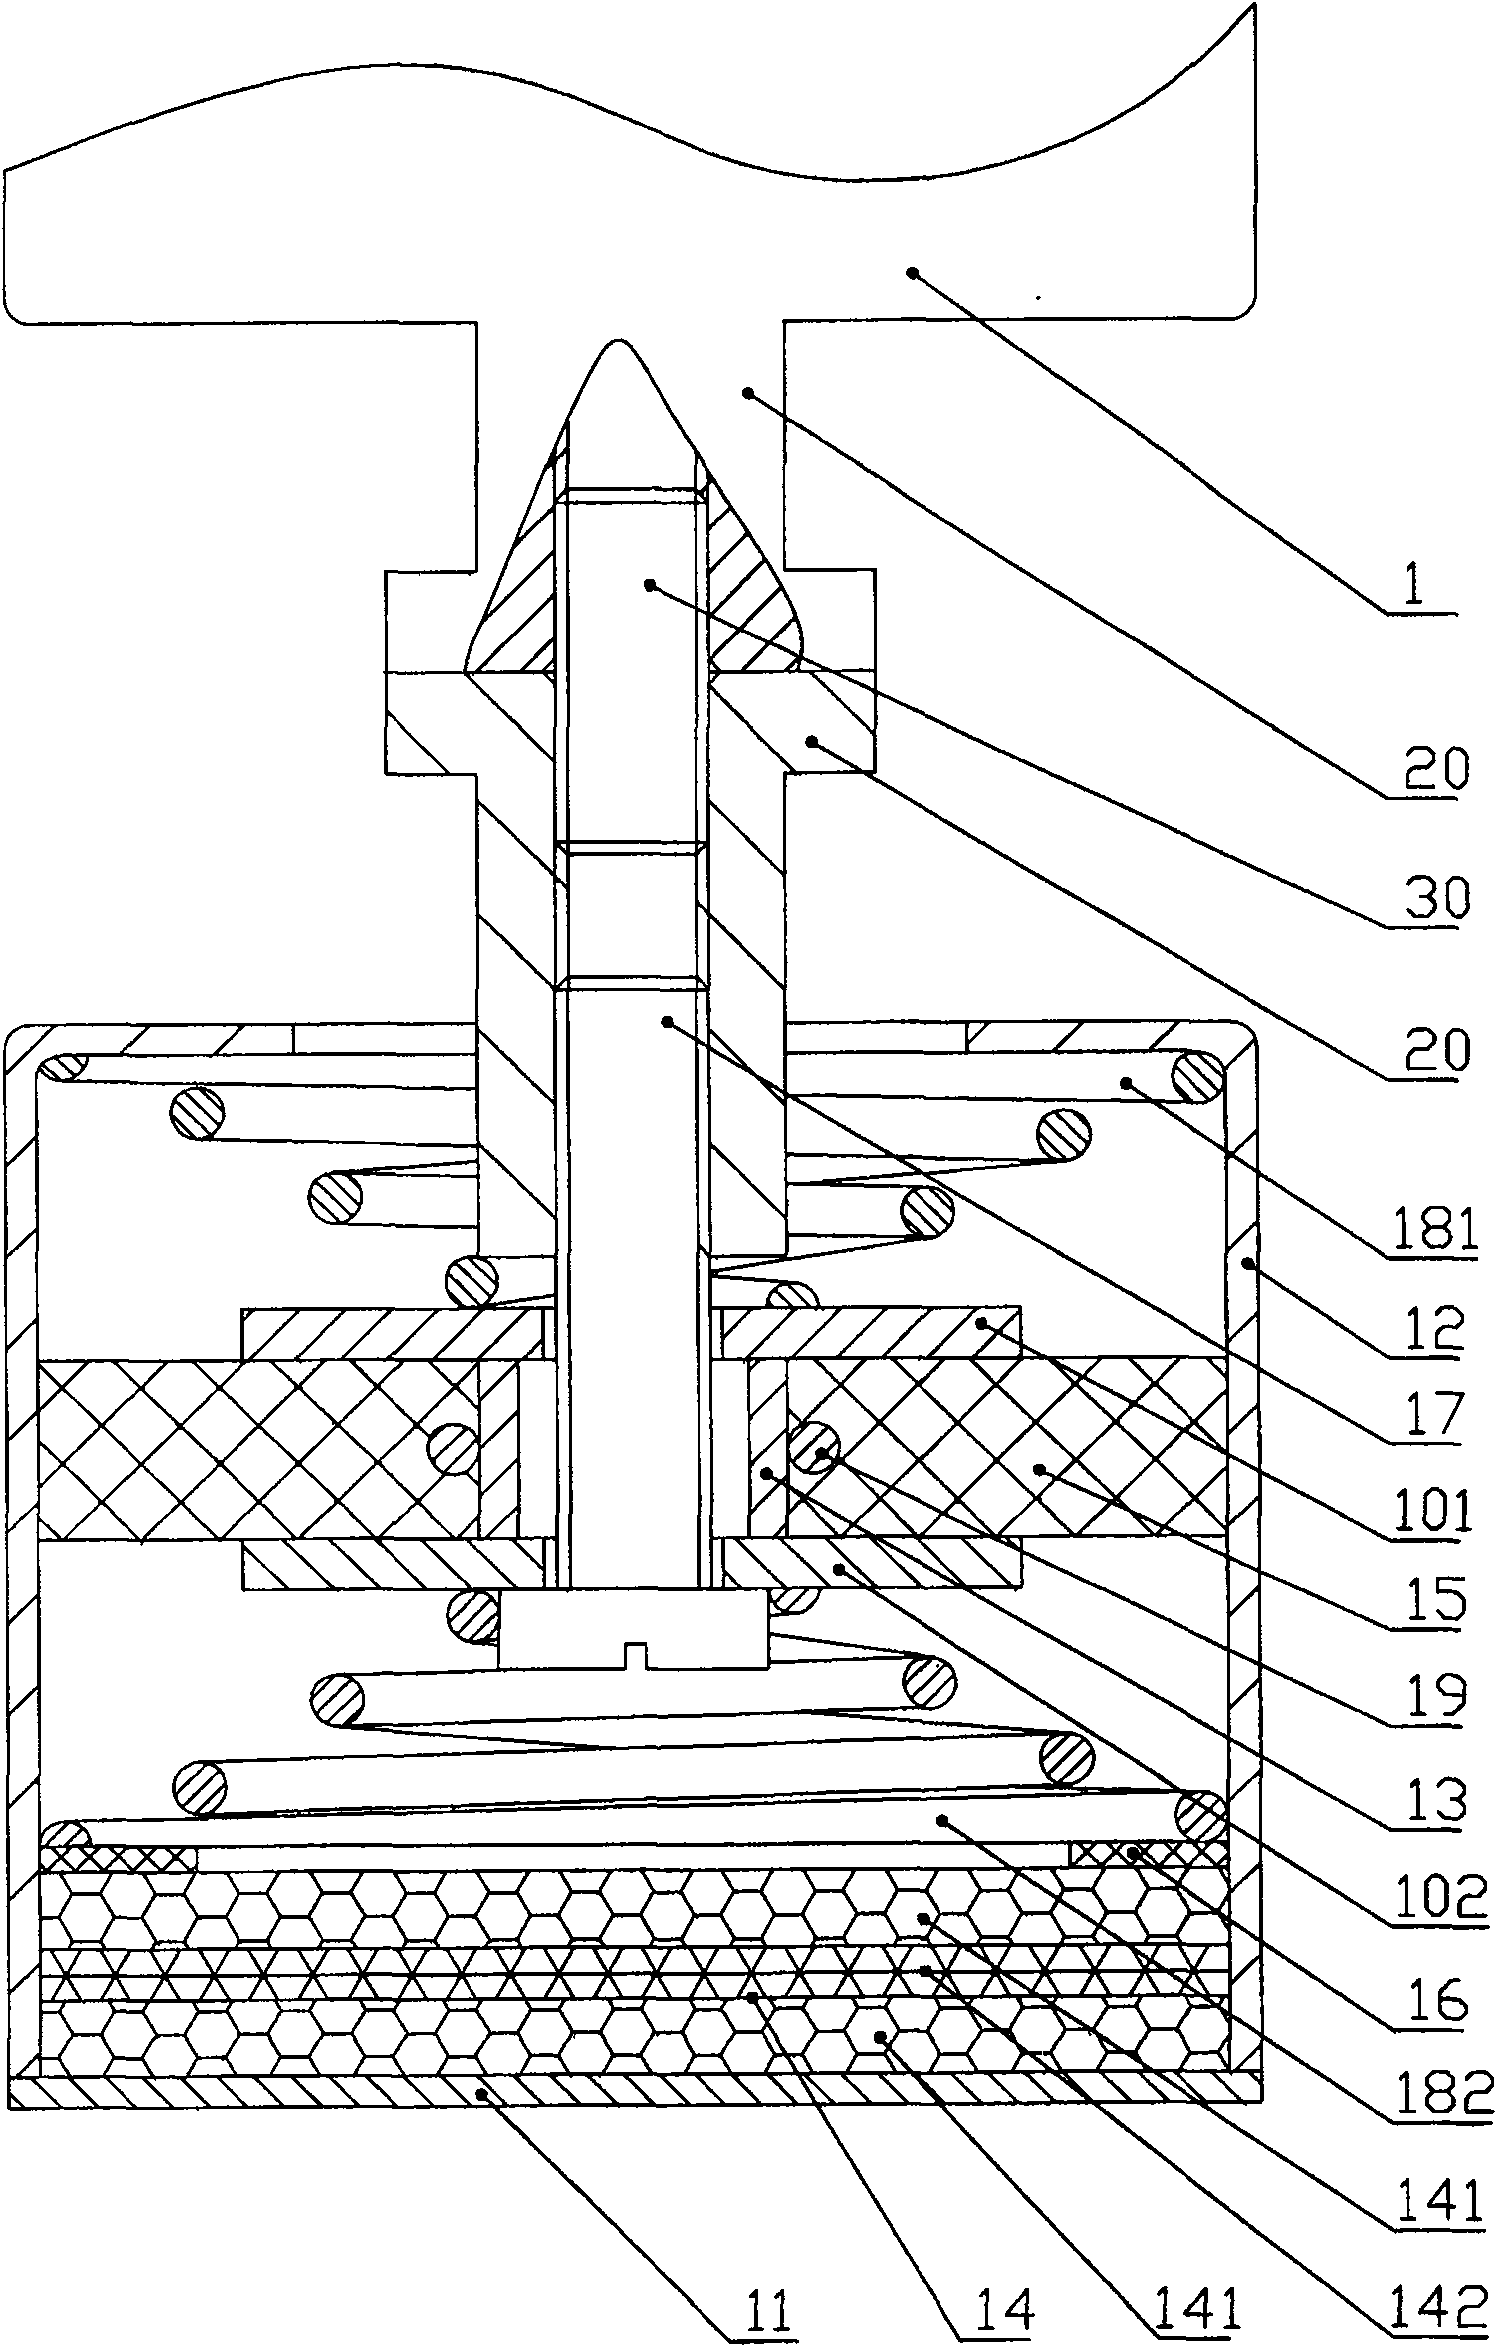 Mounting table for north-searching instrument